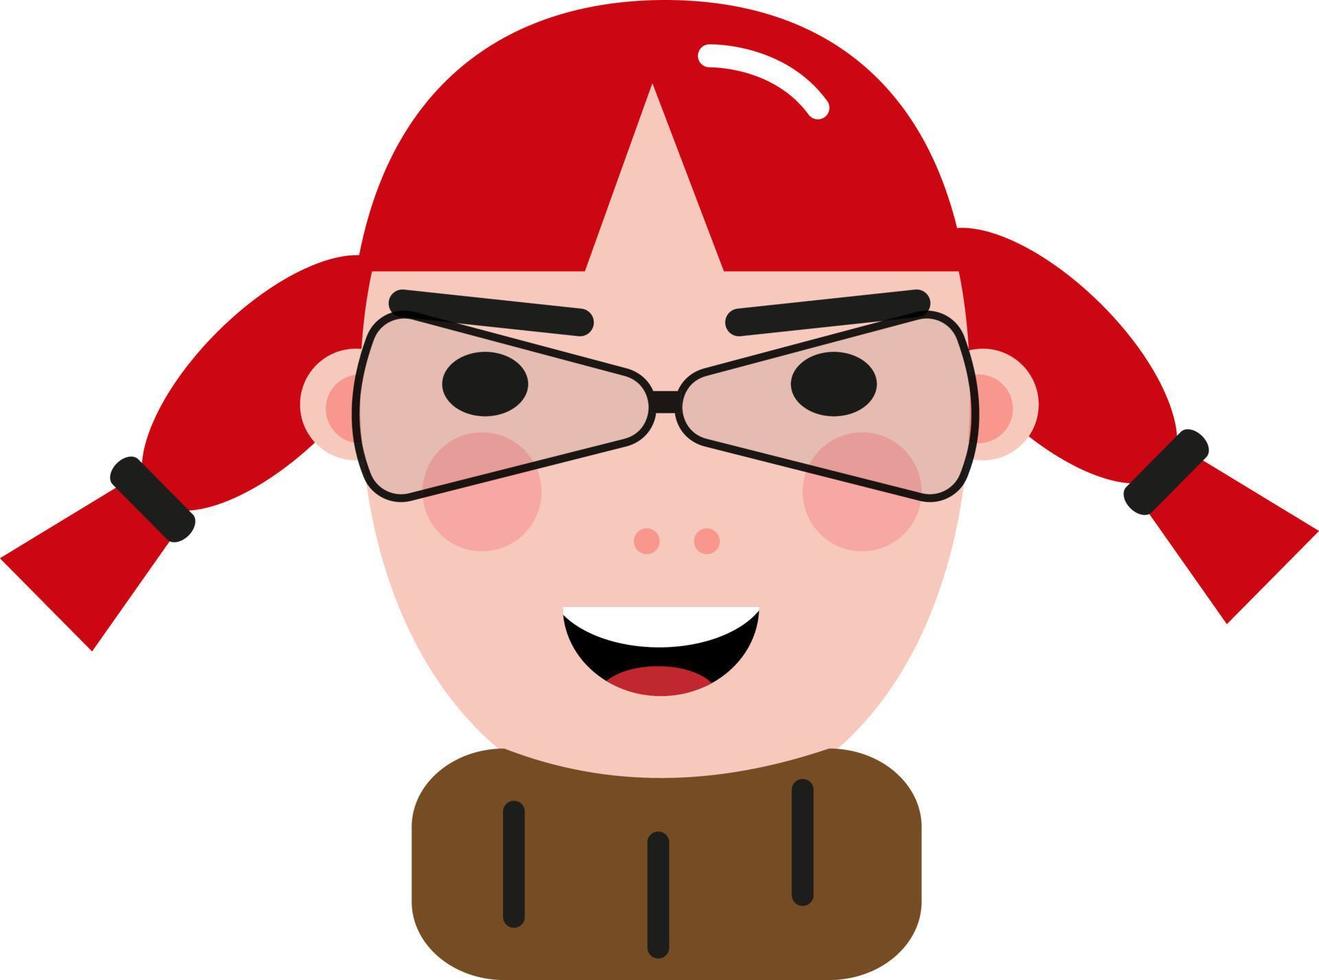 Girl with red hair and glasses, illustration, vector on a white background.